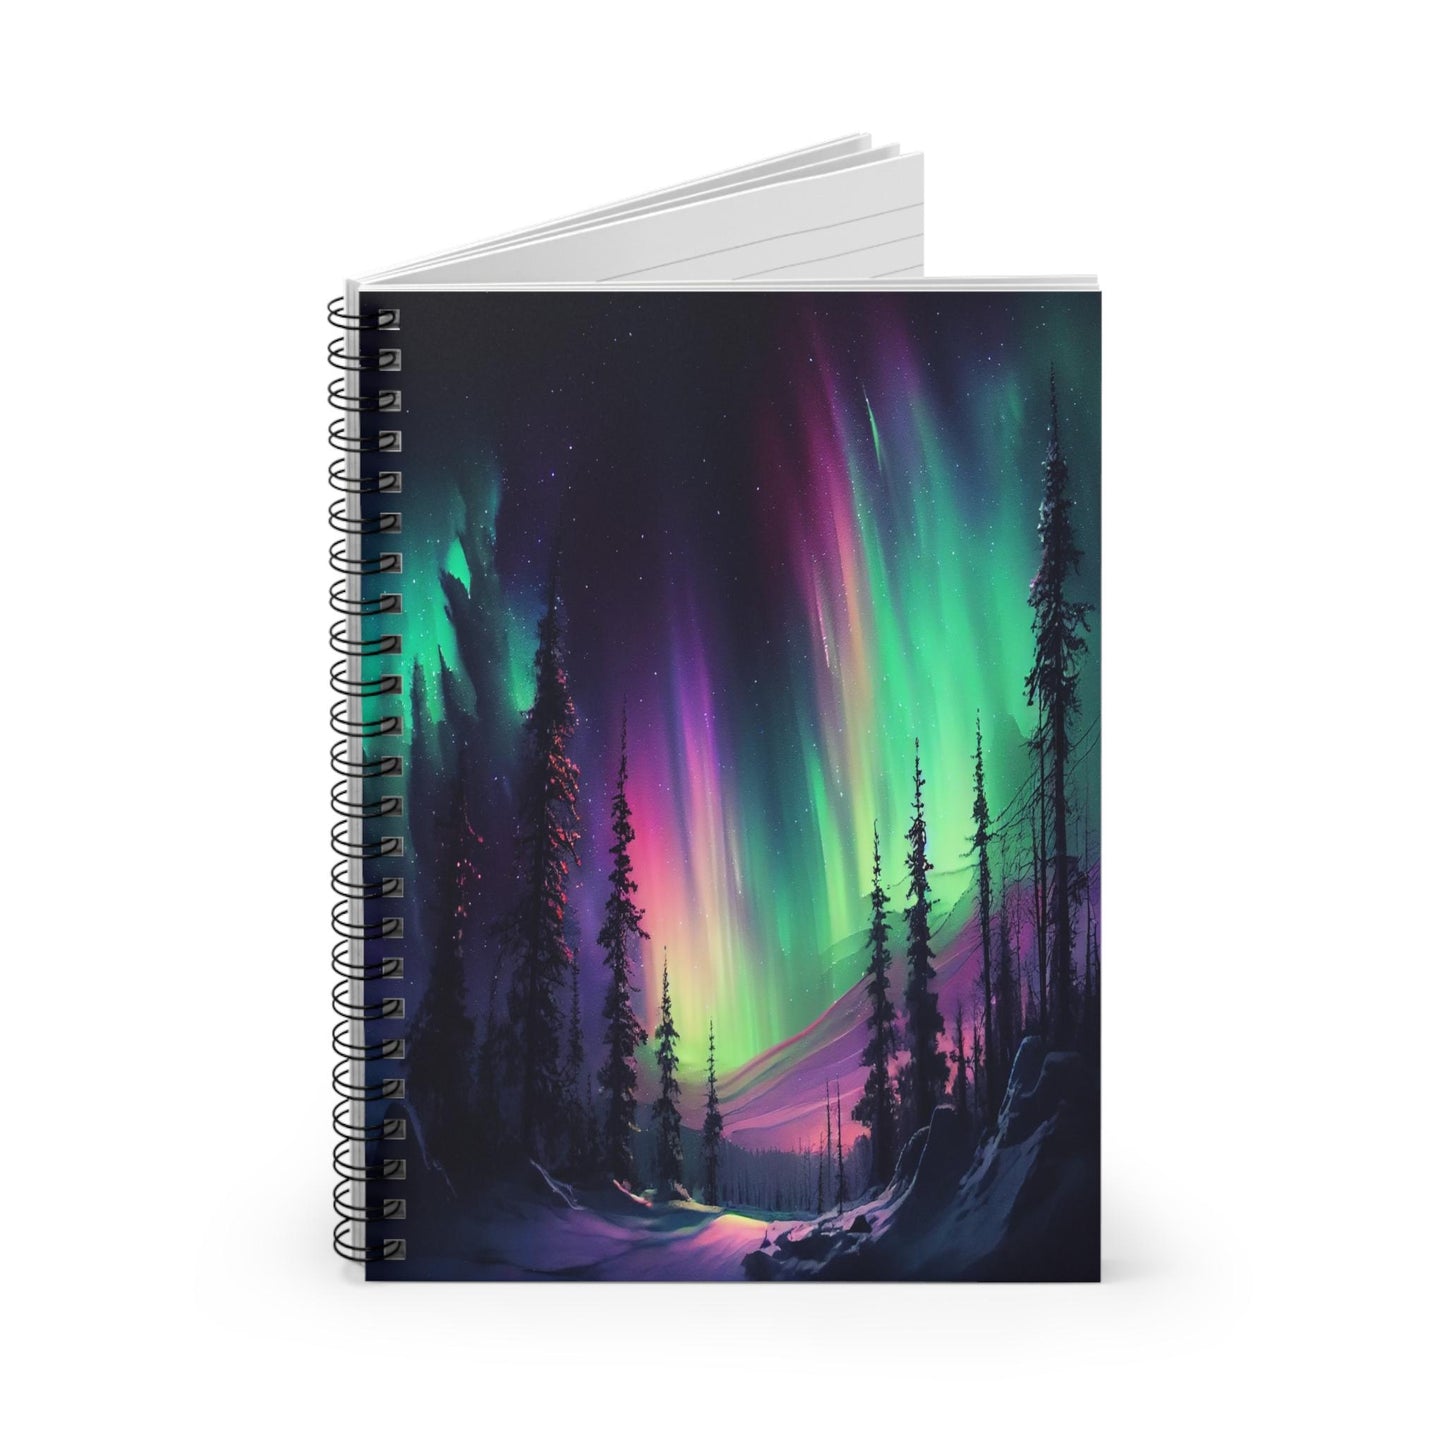 Unique Aurora Borealis Spiral Notebook Ruled Line - Personalized Northern Light View - Stationary Accessories - Perfect Aurora Lovers Gift 36